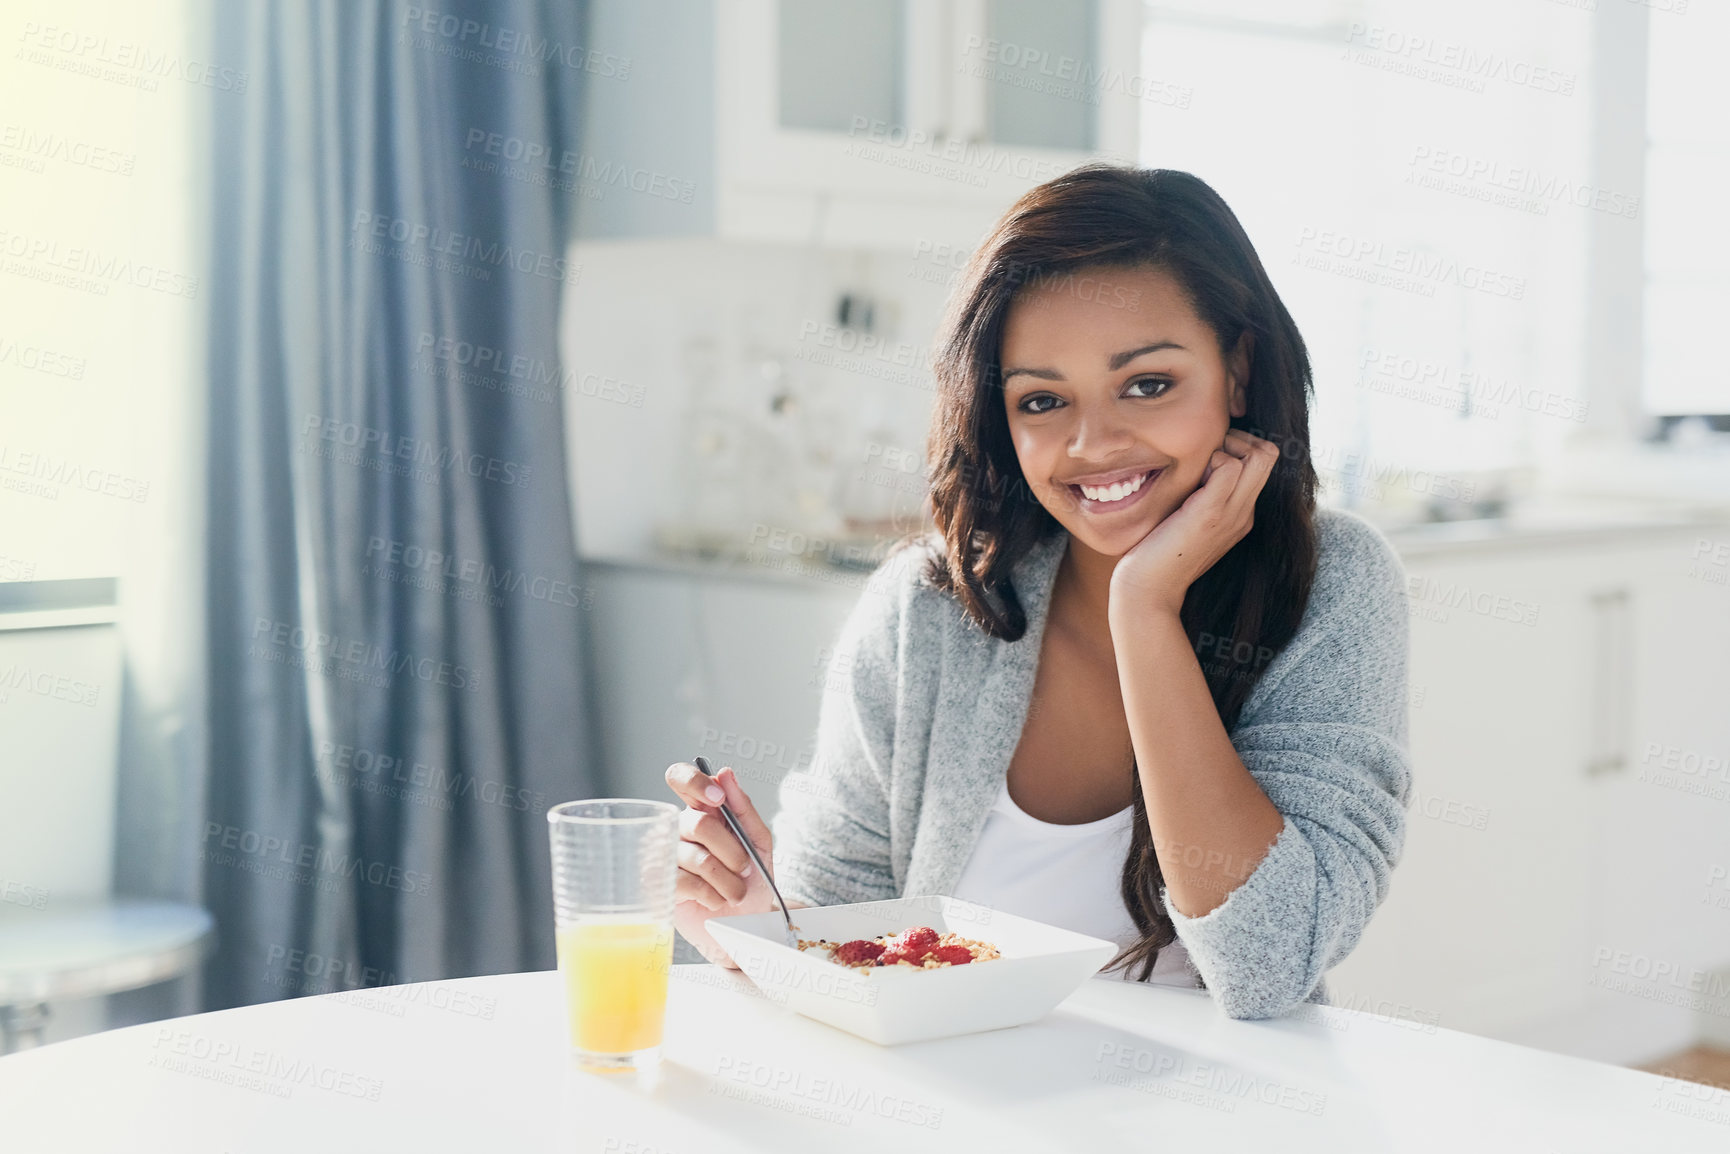 Buy stock photo Portrait of a happy young woman enjoying a healthy breakfast at home